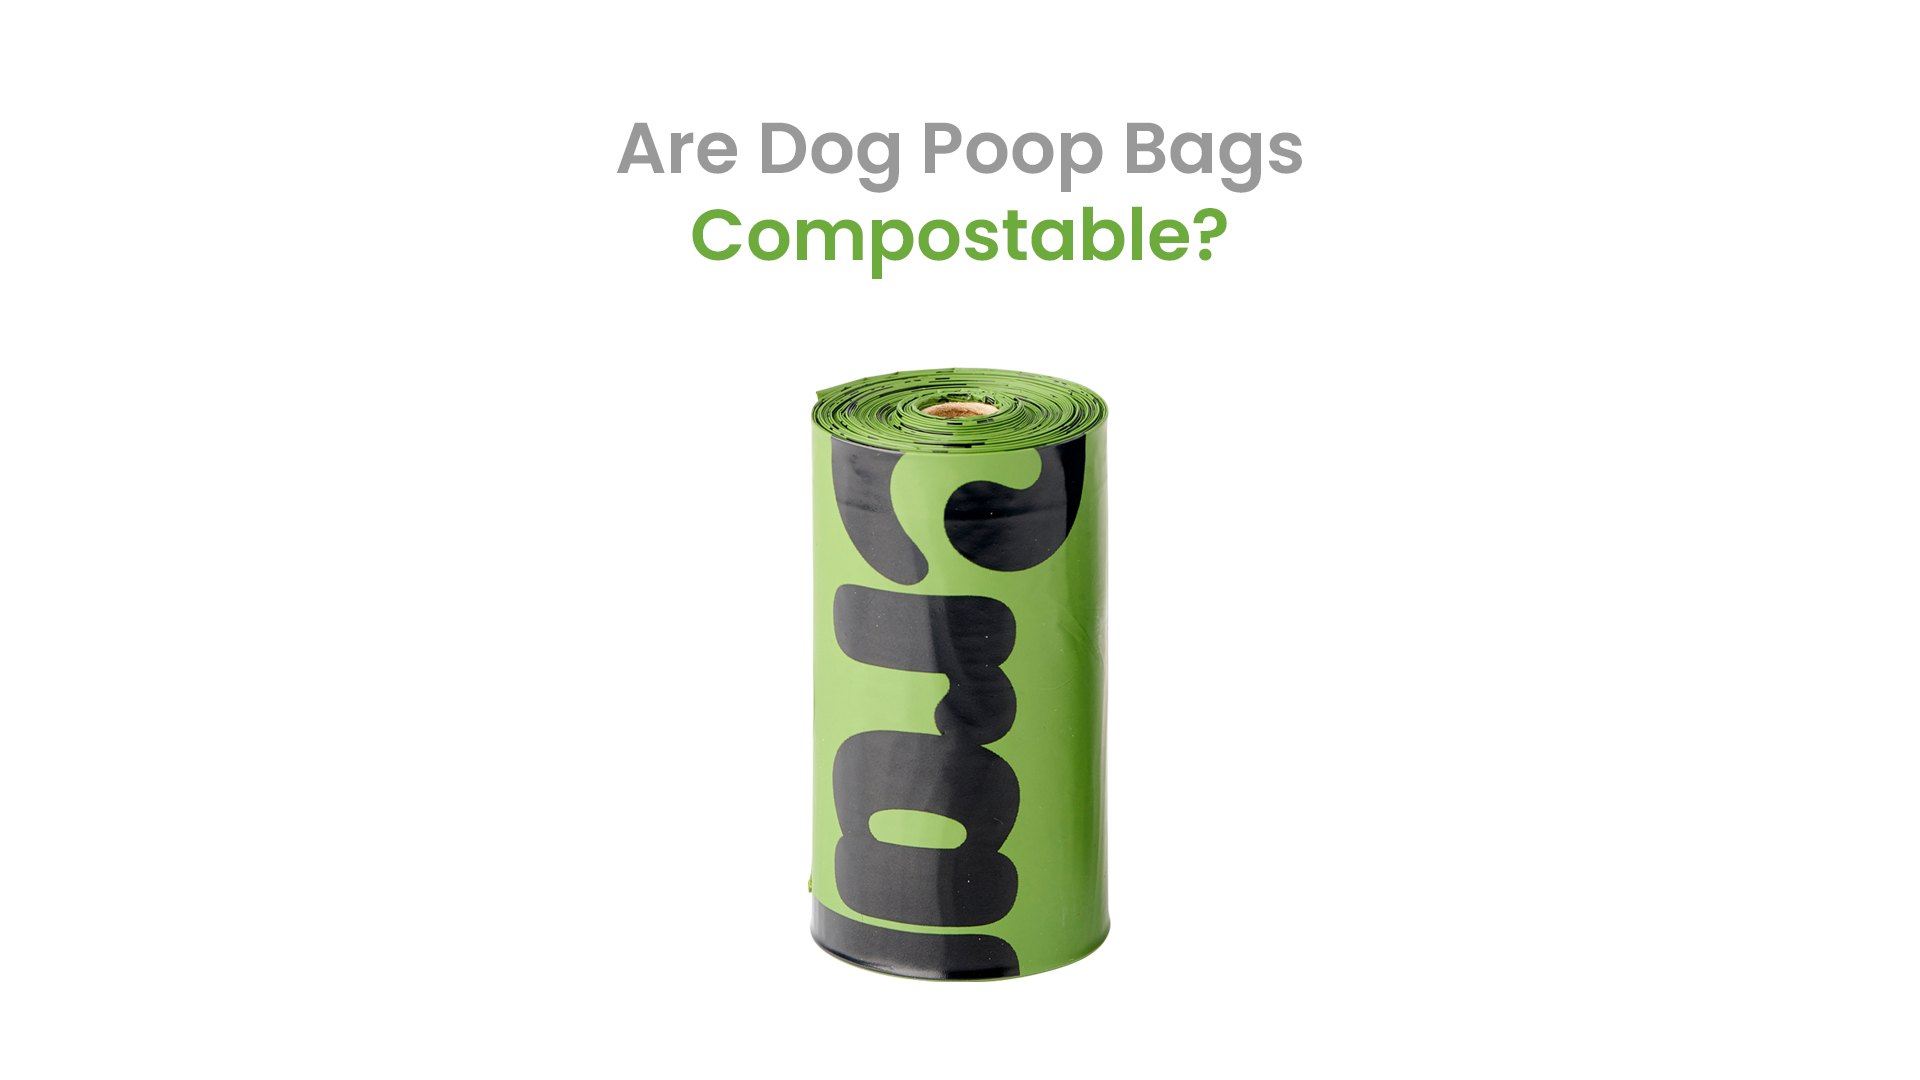 Image of a dog poop bag with the words Are Dog Poop Bags Compostable? above it